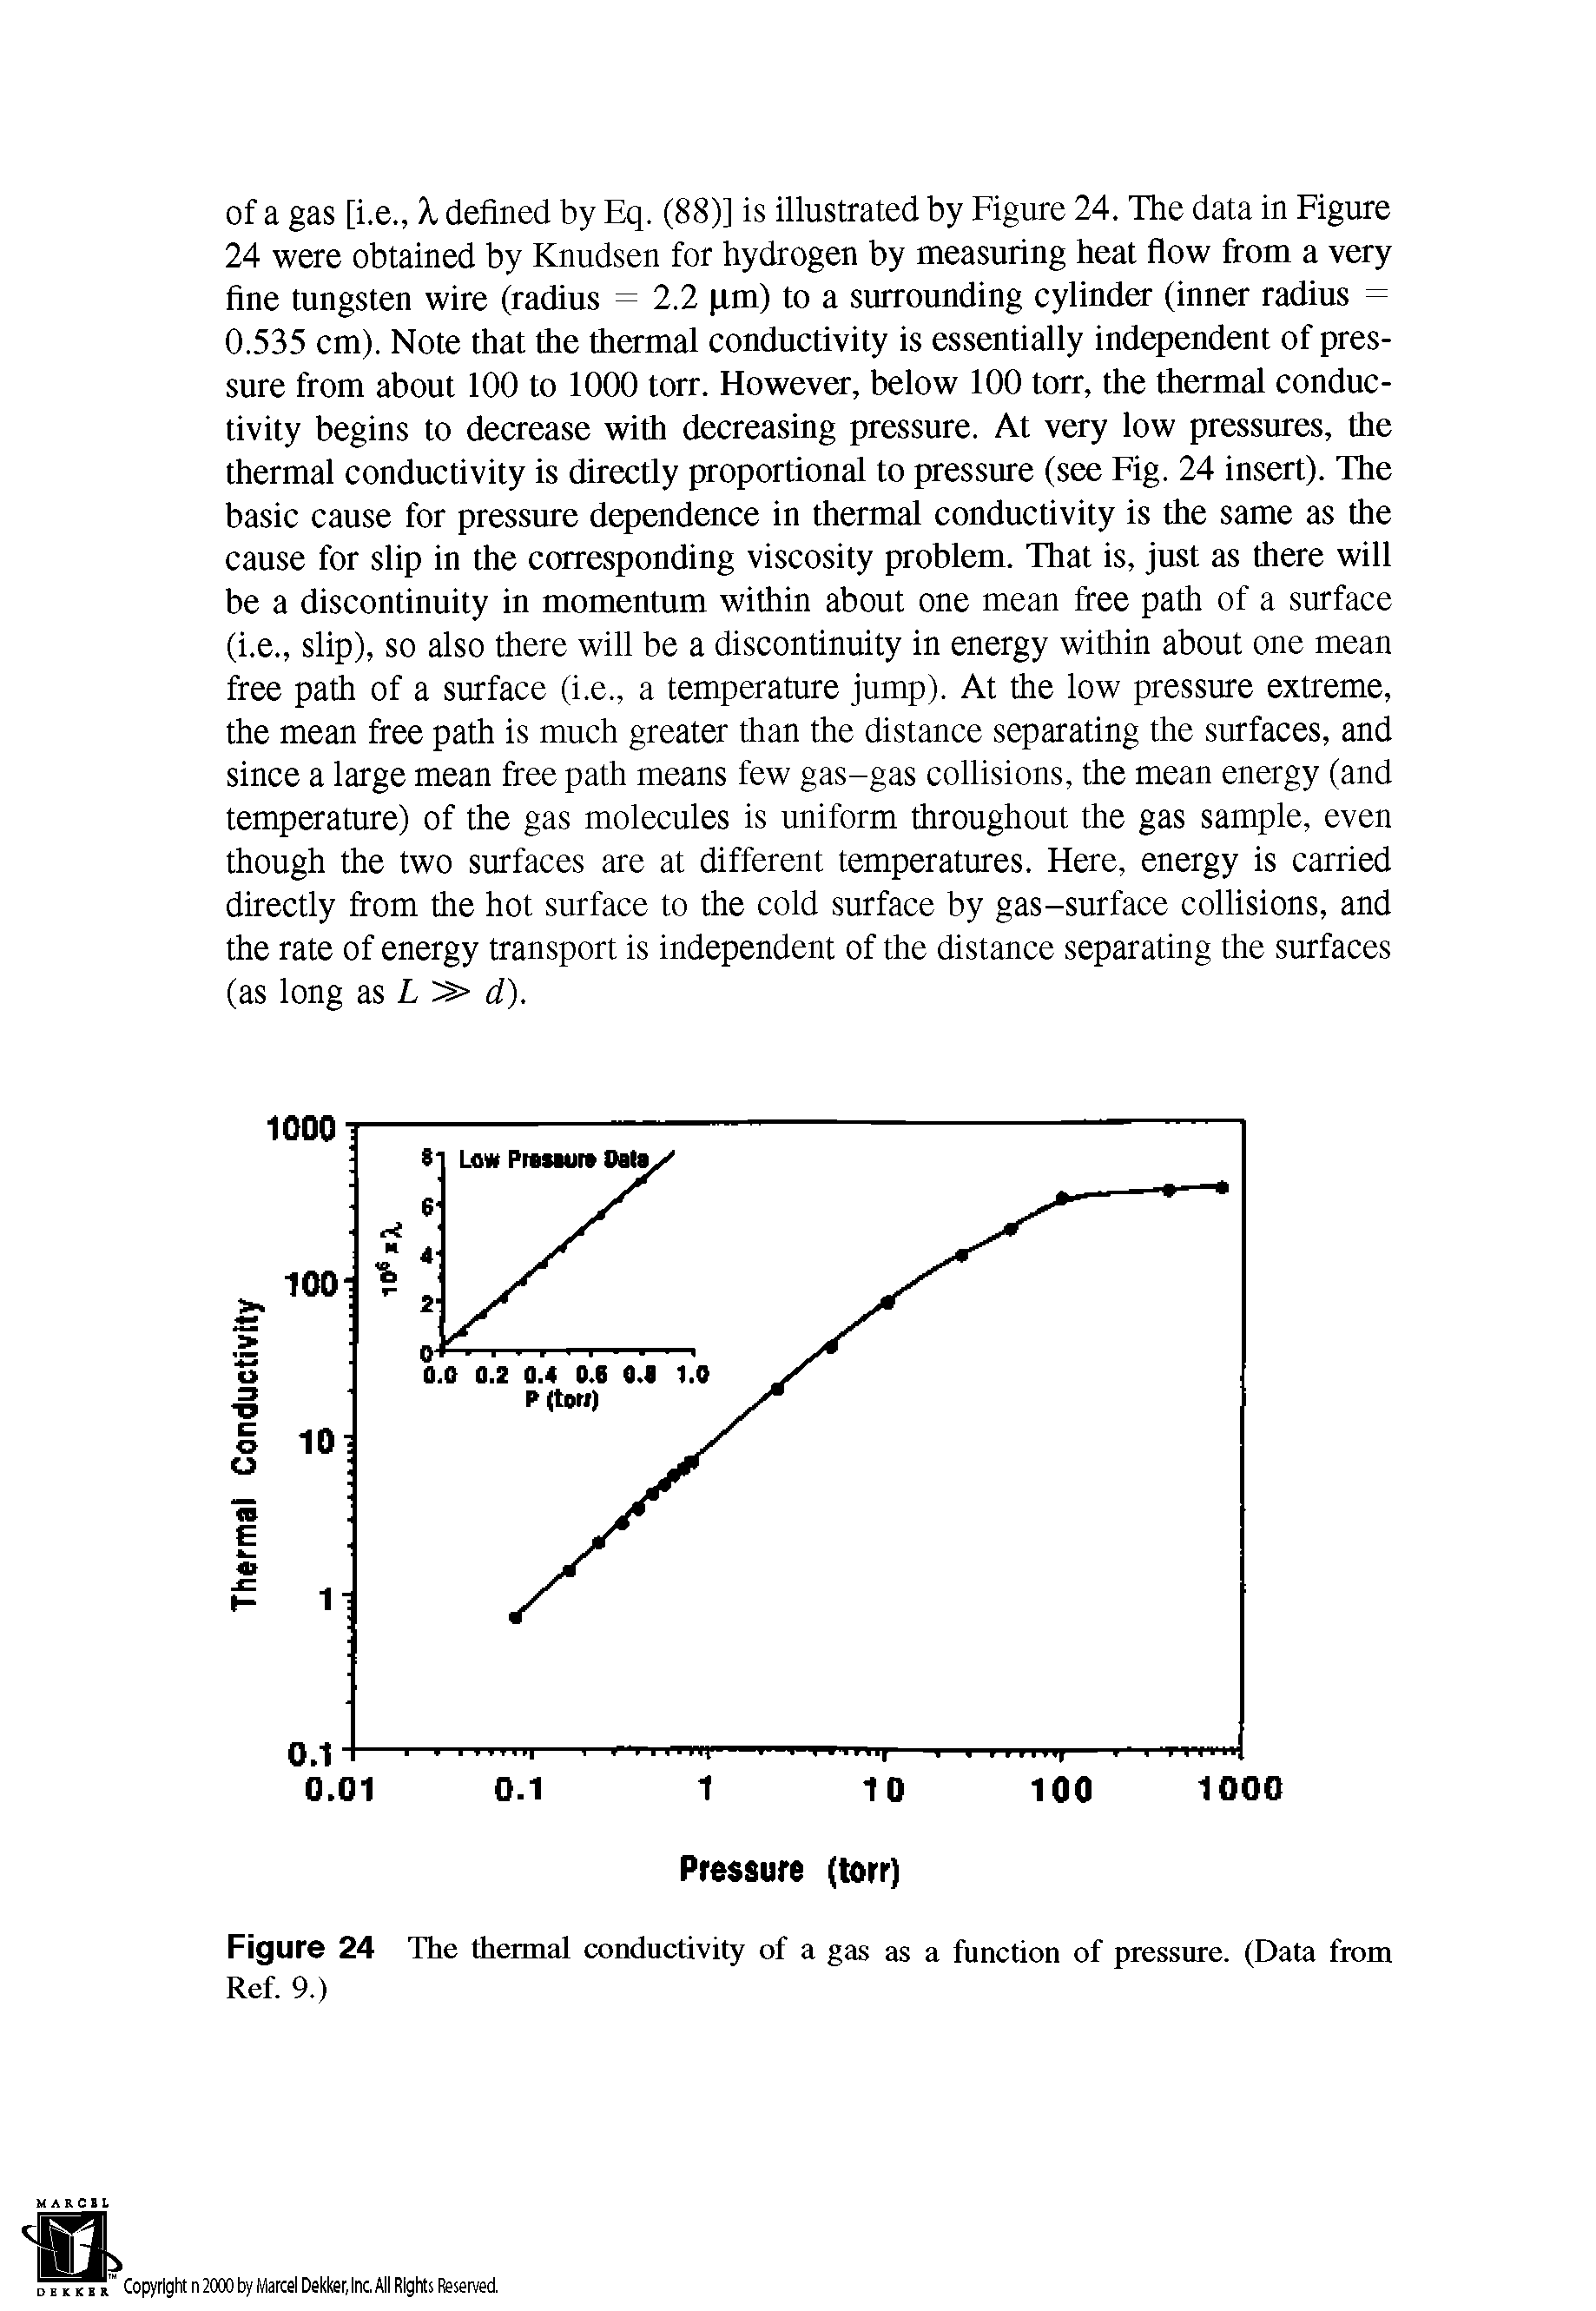 Figure 24 The thermal conductivity of a gas as a function of pressure. (Data from Ref. 9.)...